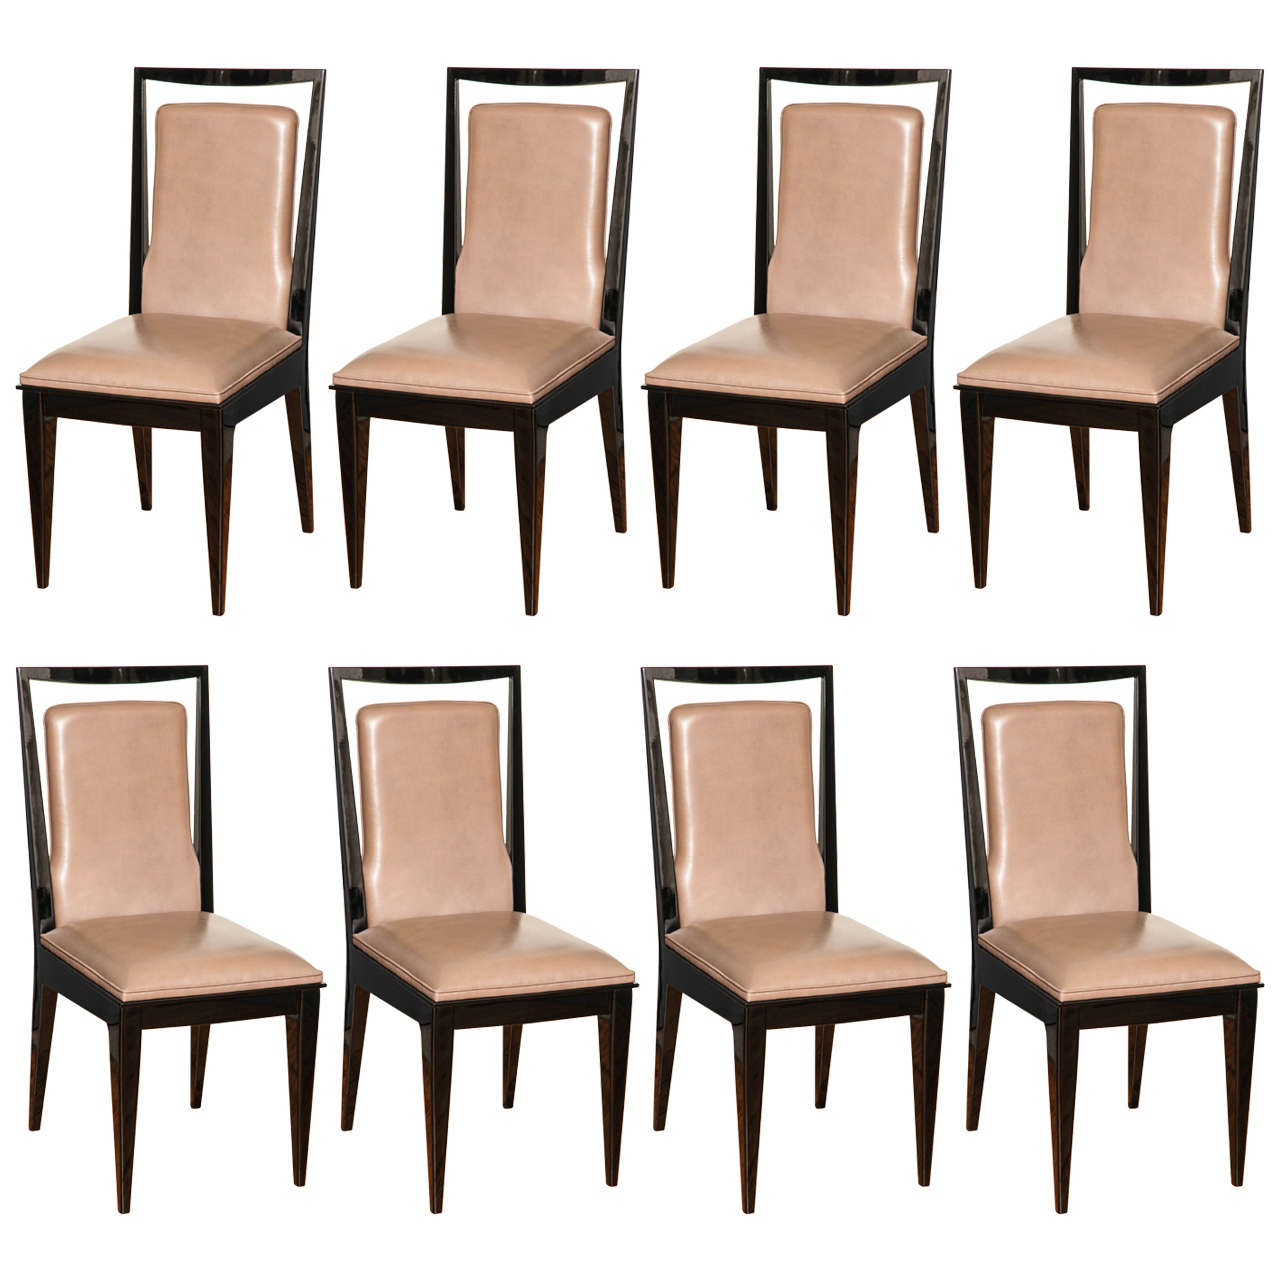 Fabulous Suite of Eight Modernist Dining Chairs